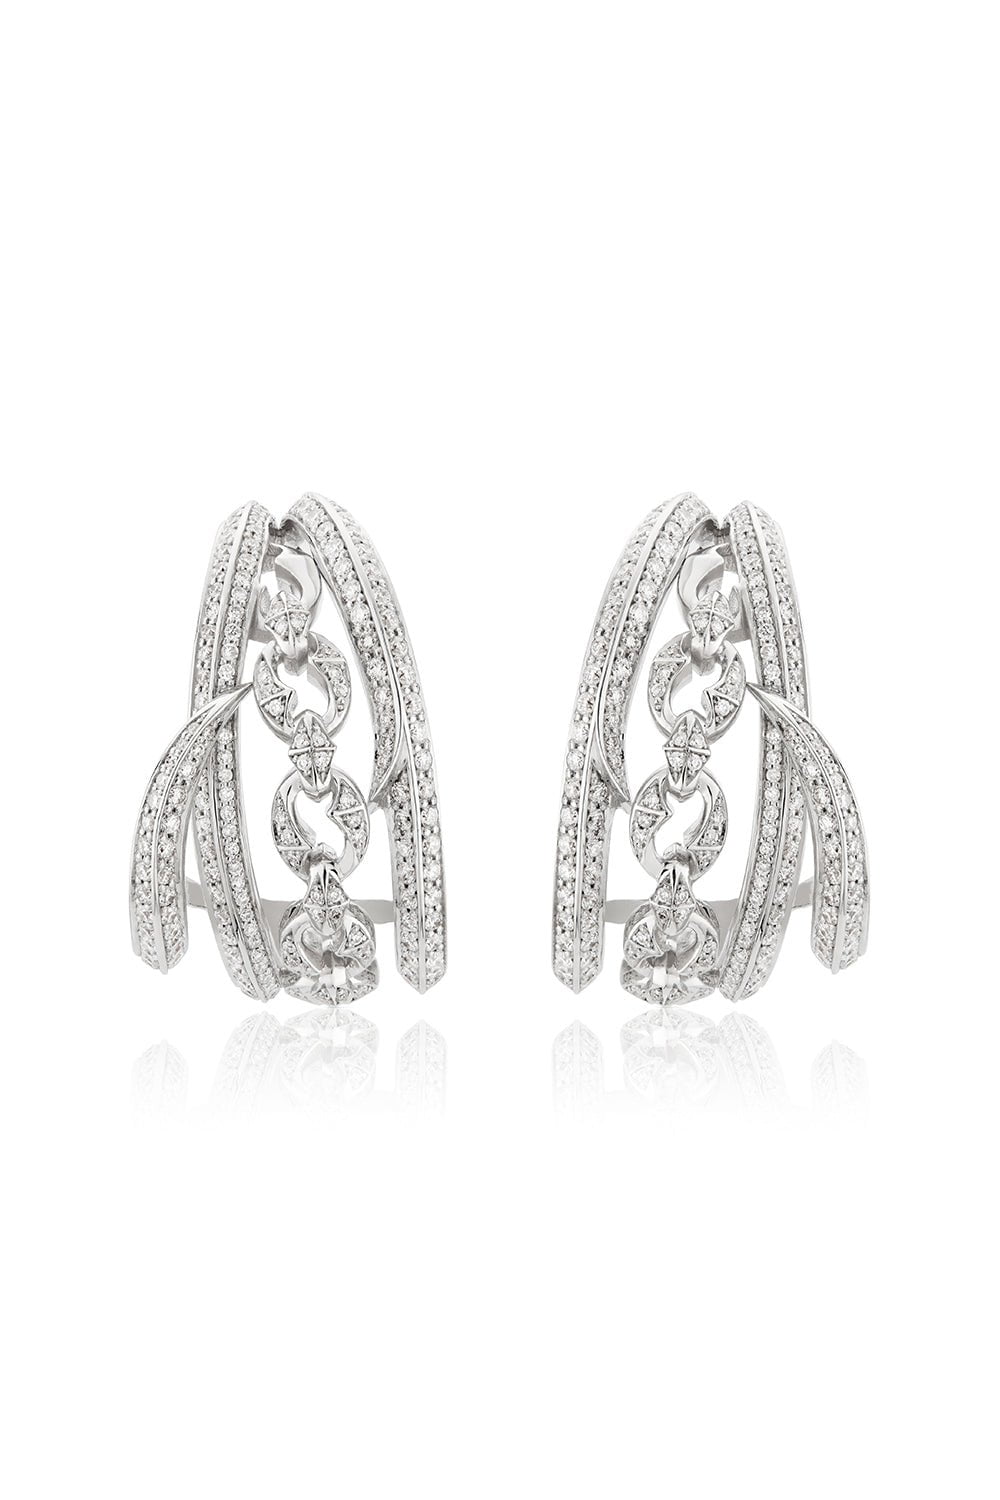 STEPHEN WEBSTER-Entwined Stud Earrings-WHITE GOLD